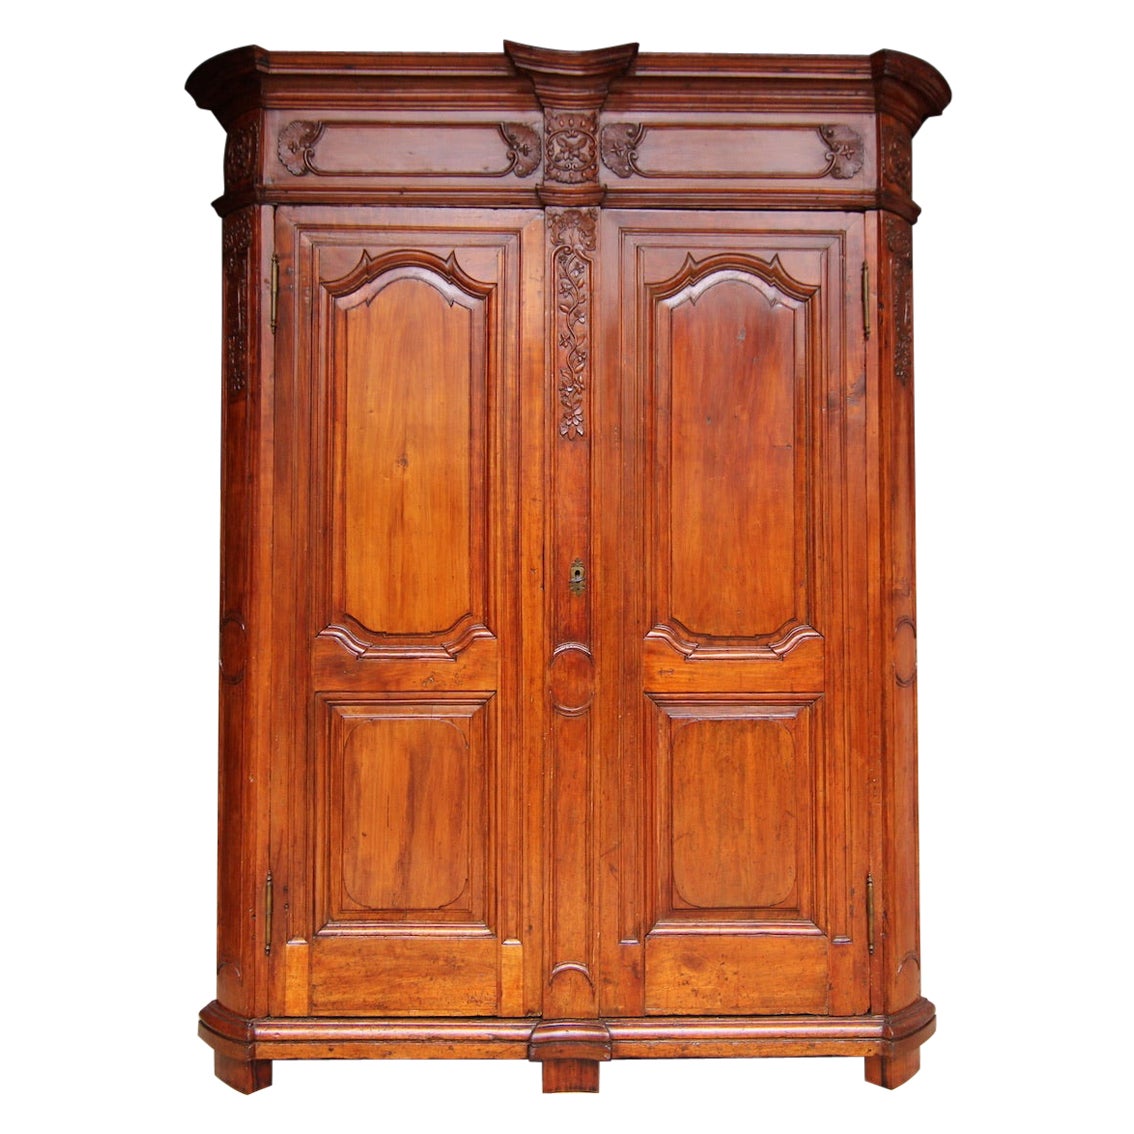 18th Century Liegoise Armoire in Cherrywood